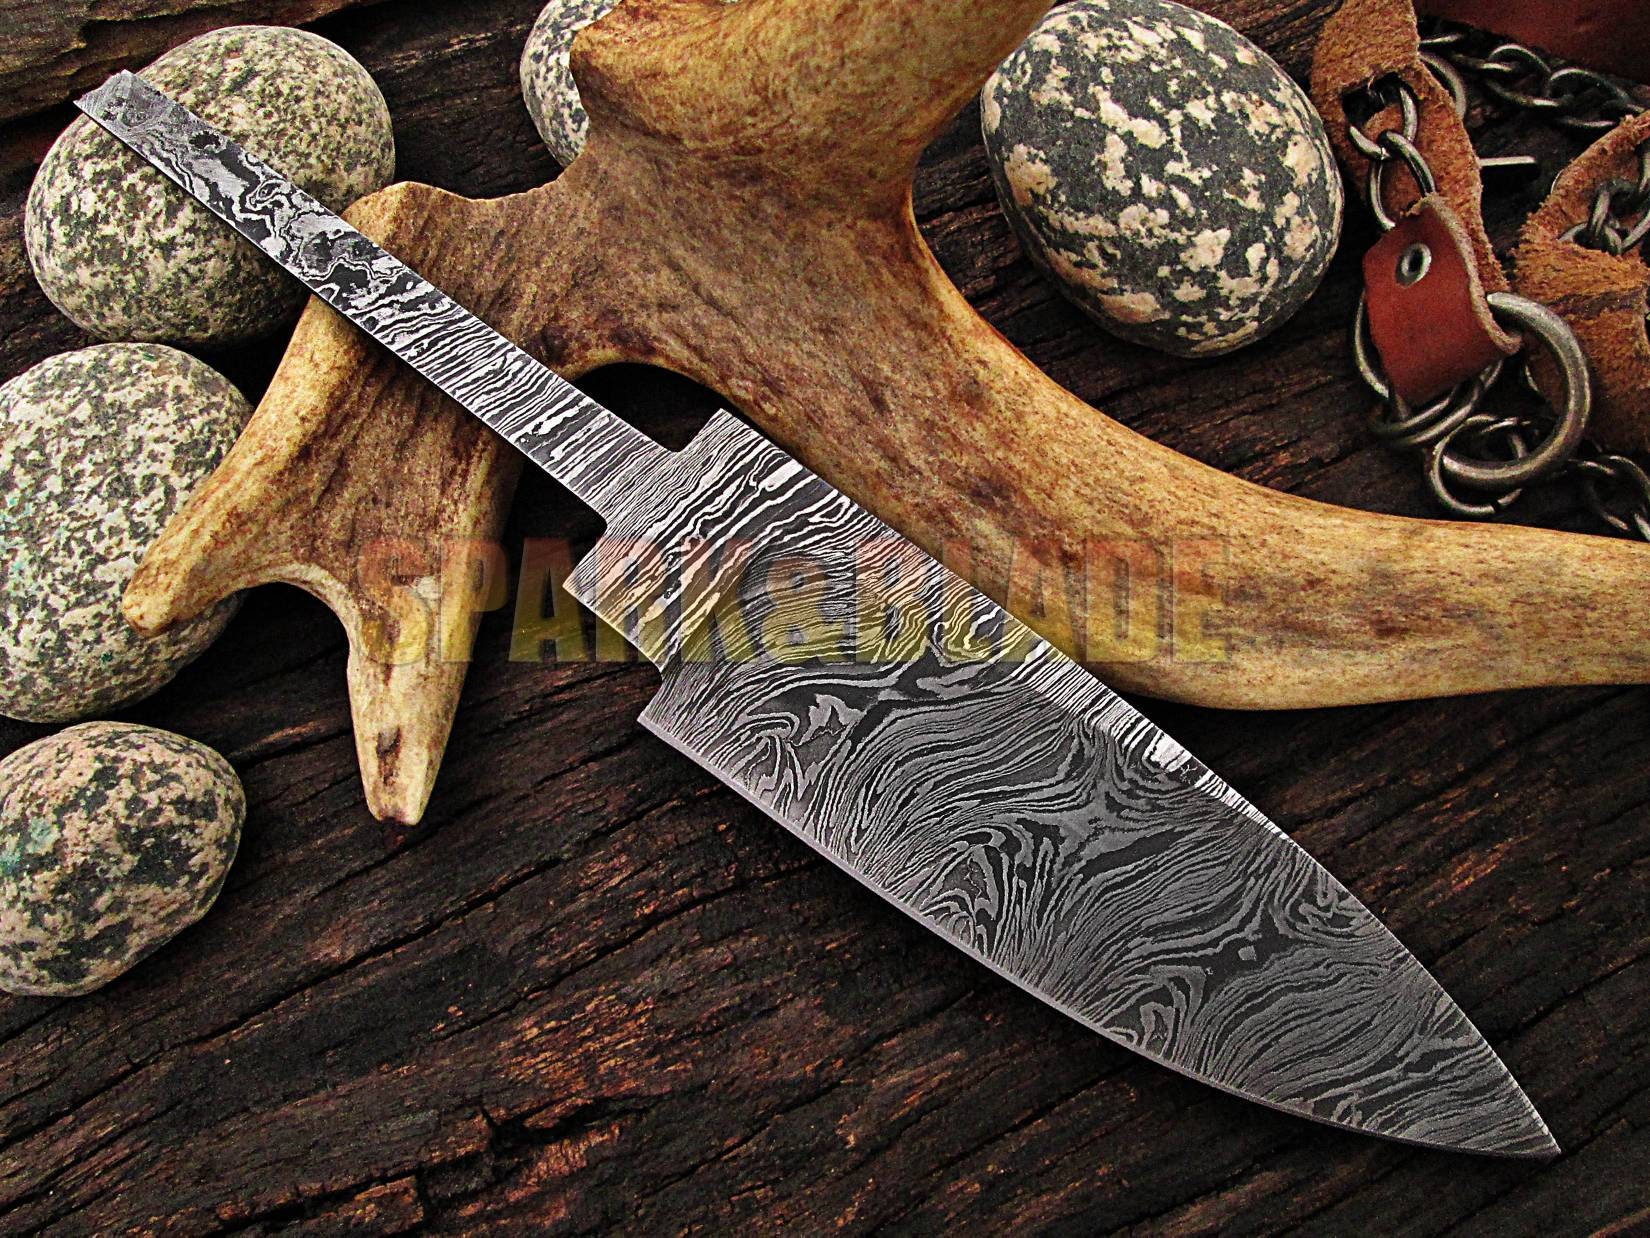 New Handmade Damascus Chef Knife 8.5 Inch Home Kitchen Tool